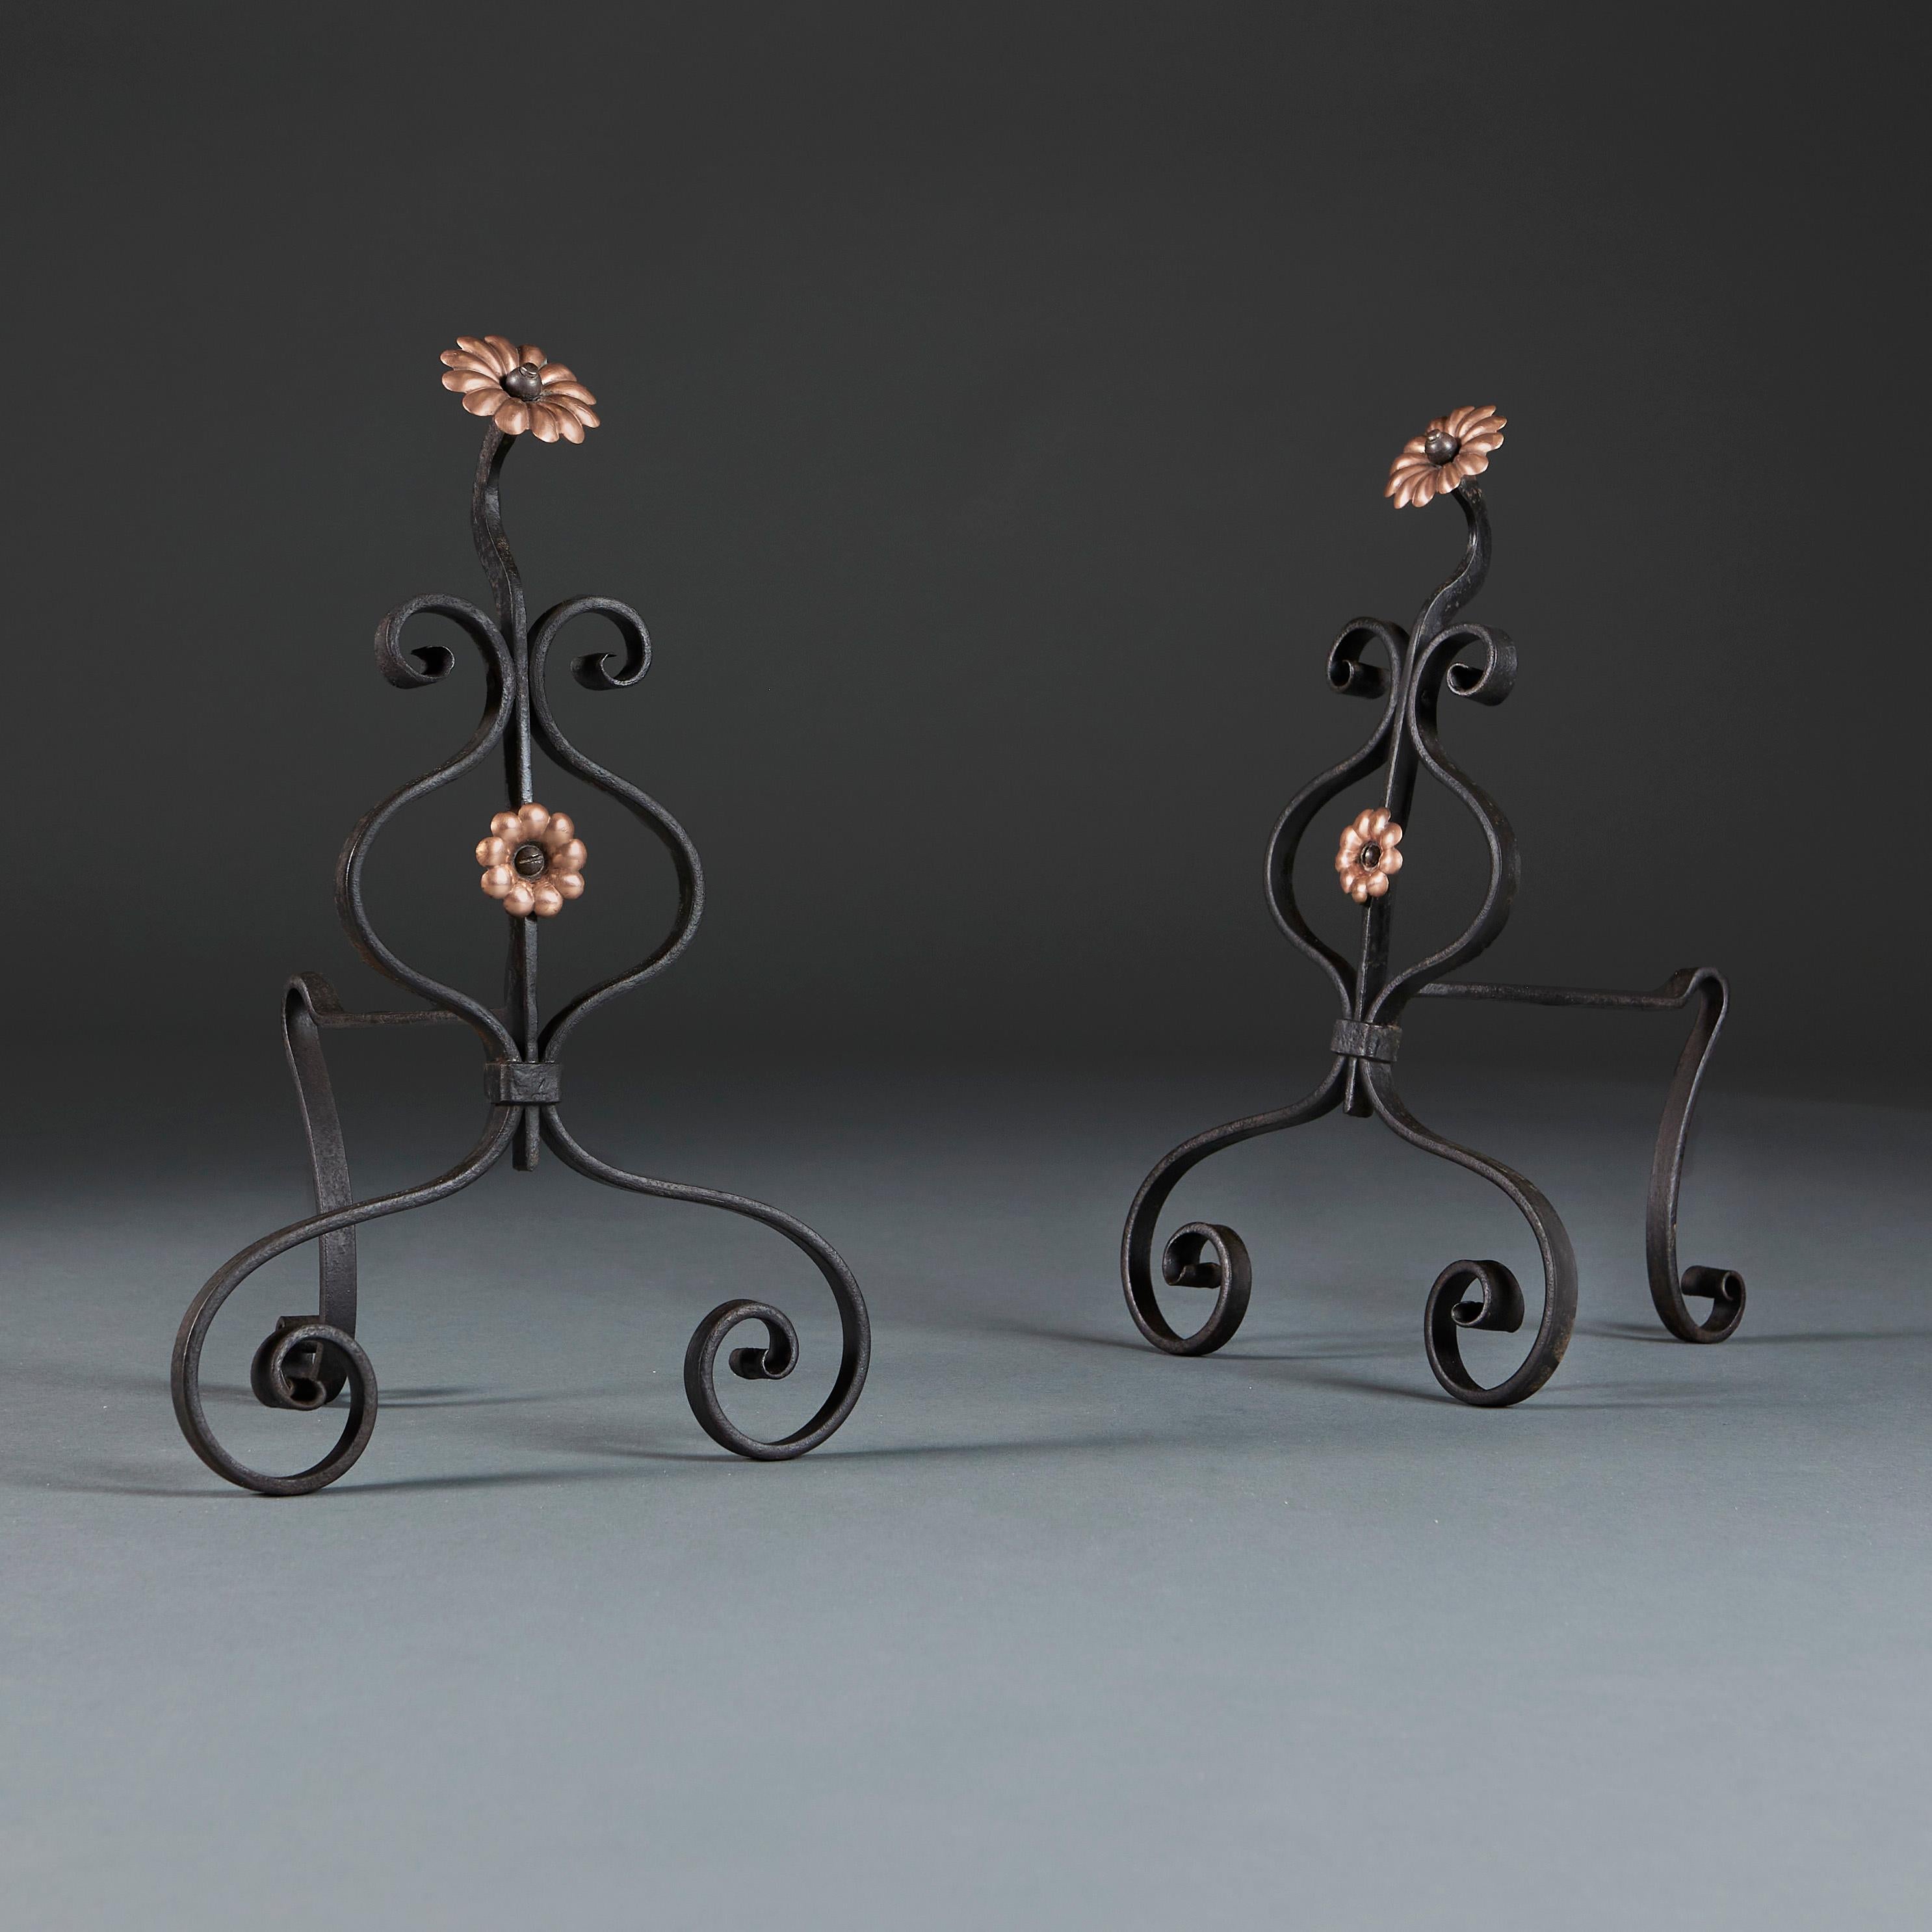 England, circa 1910

A pair of early twentieth century arts and crafts firedogs in the manner of M.H. Bailie Scott with a scrolling wrought iron structure, decorated with moulded copper flowers.

Height 37.00cm
Width 24.00cm
Depth 21.00cm.